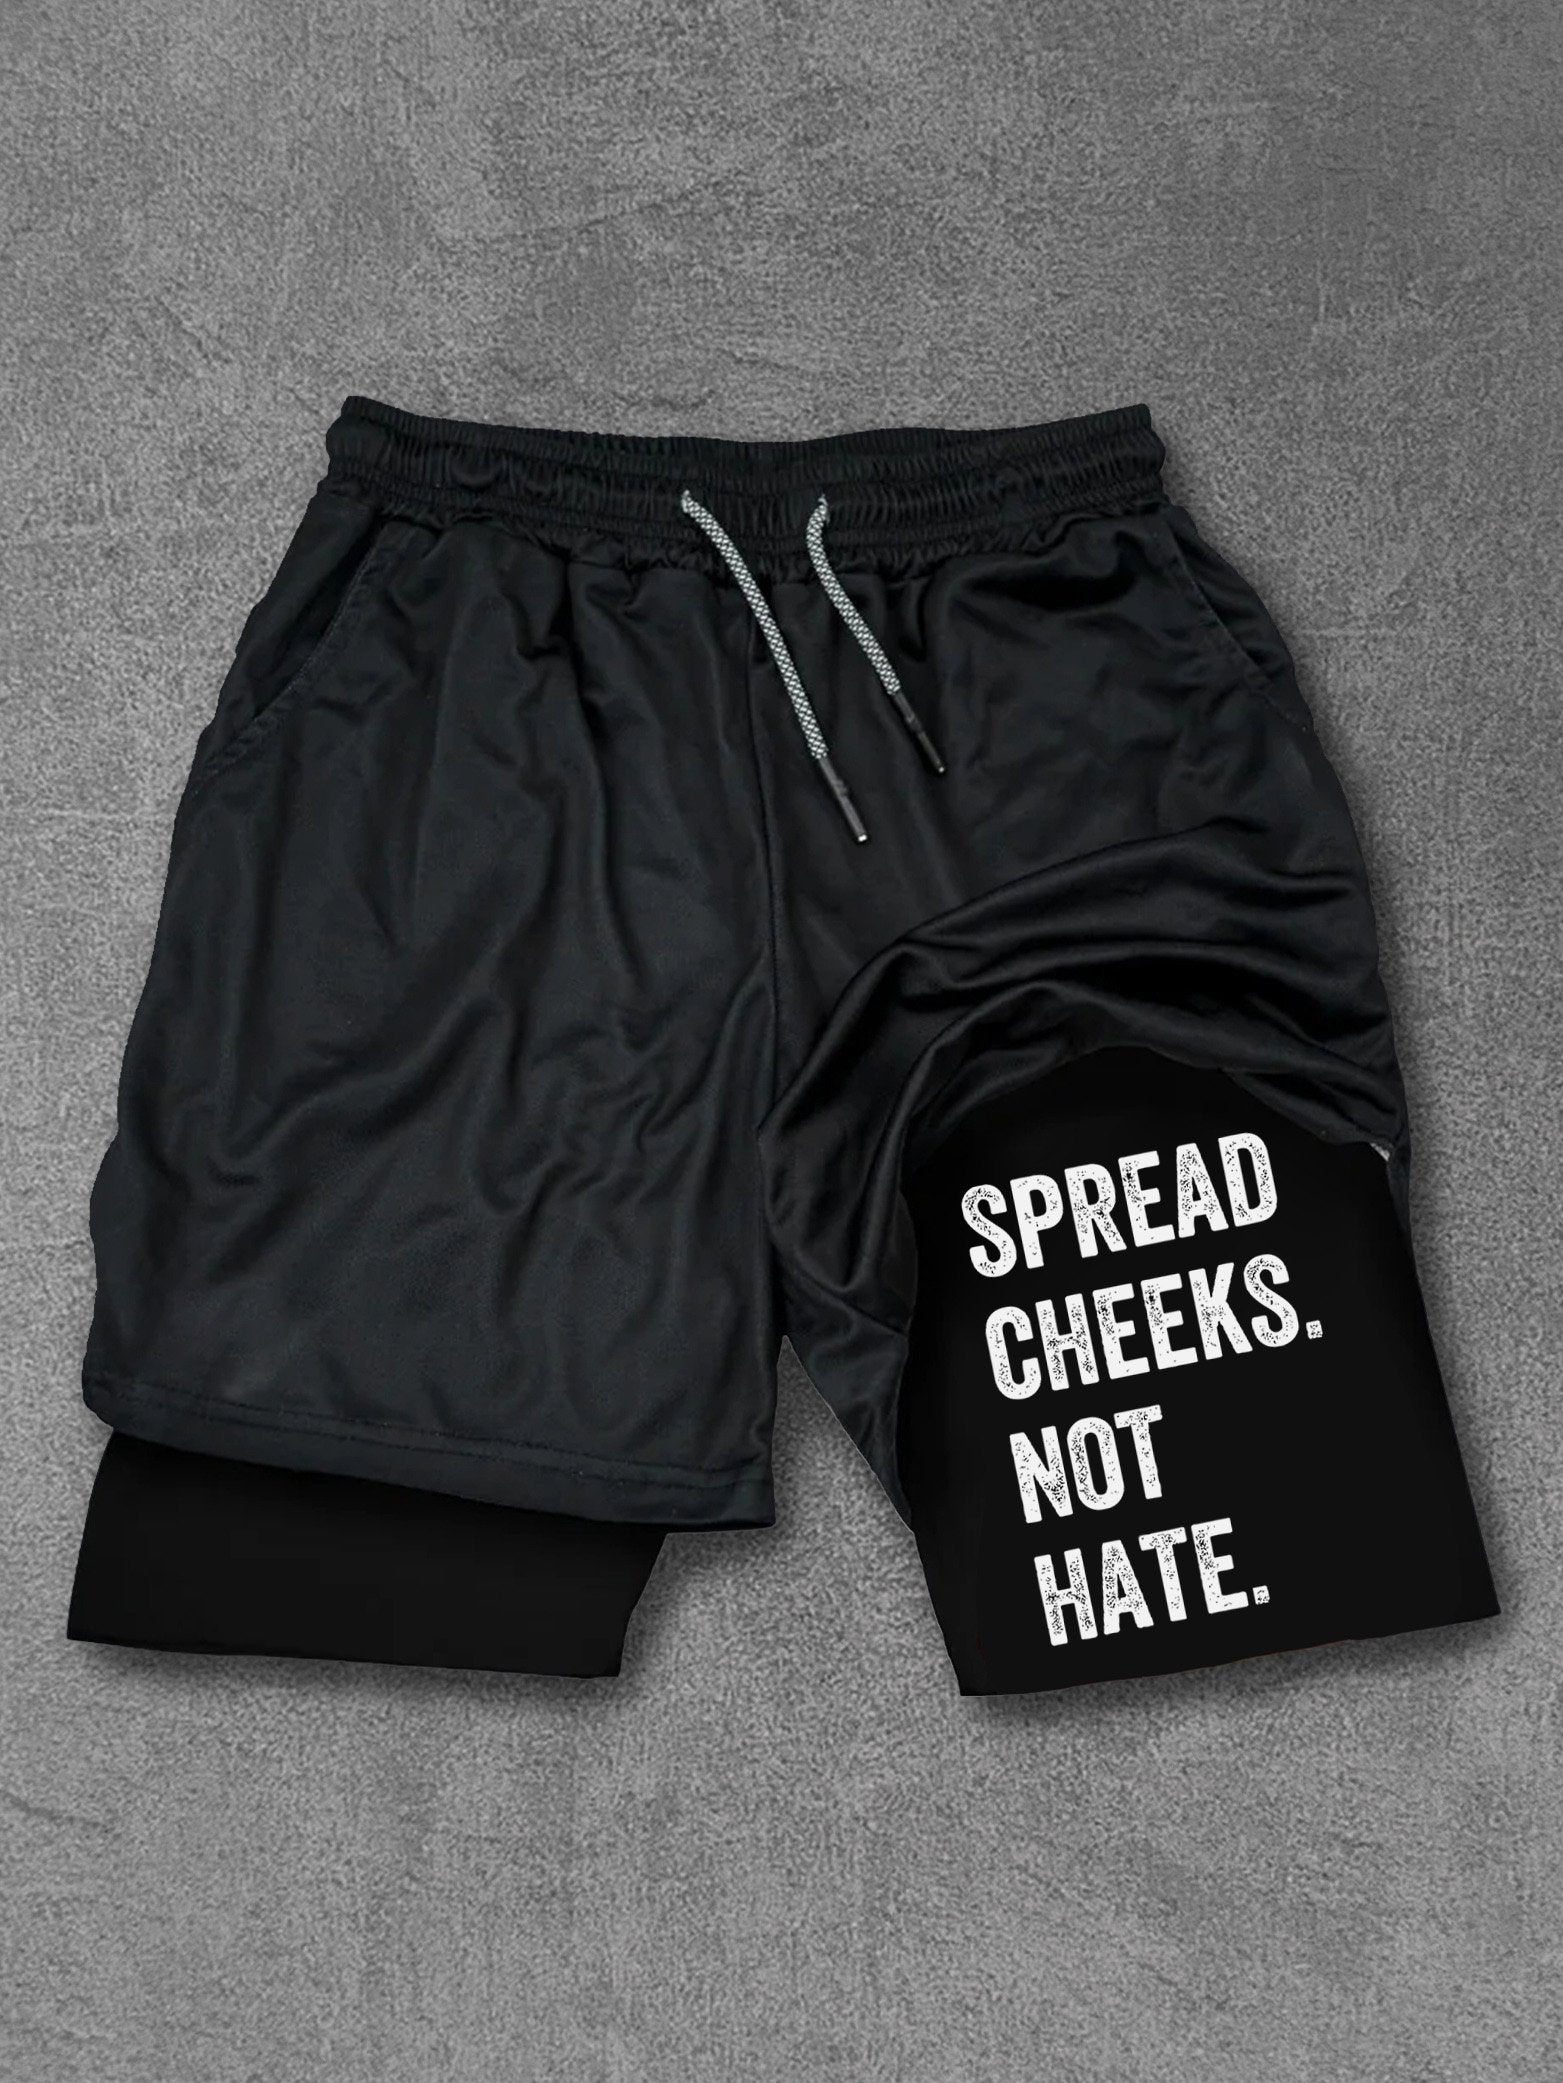 spread cheeks not hate Performance Training Shorts